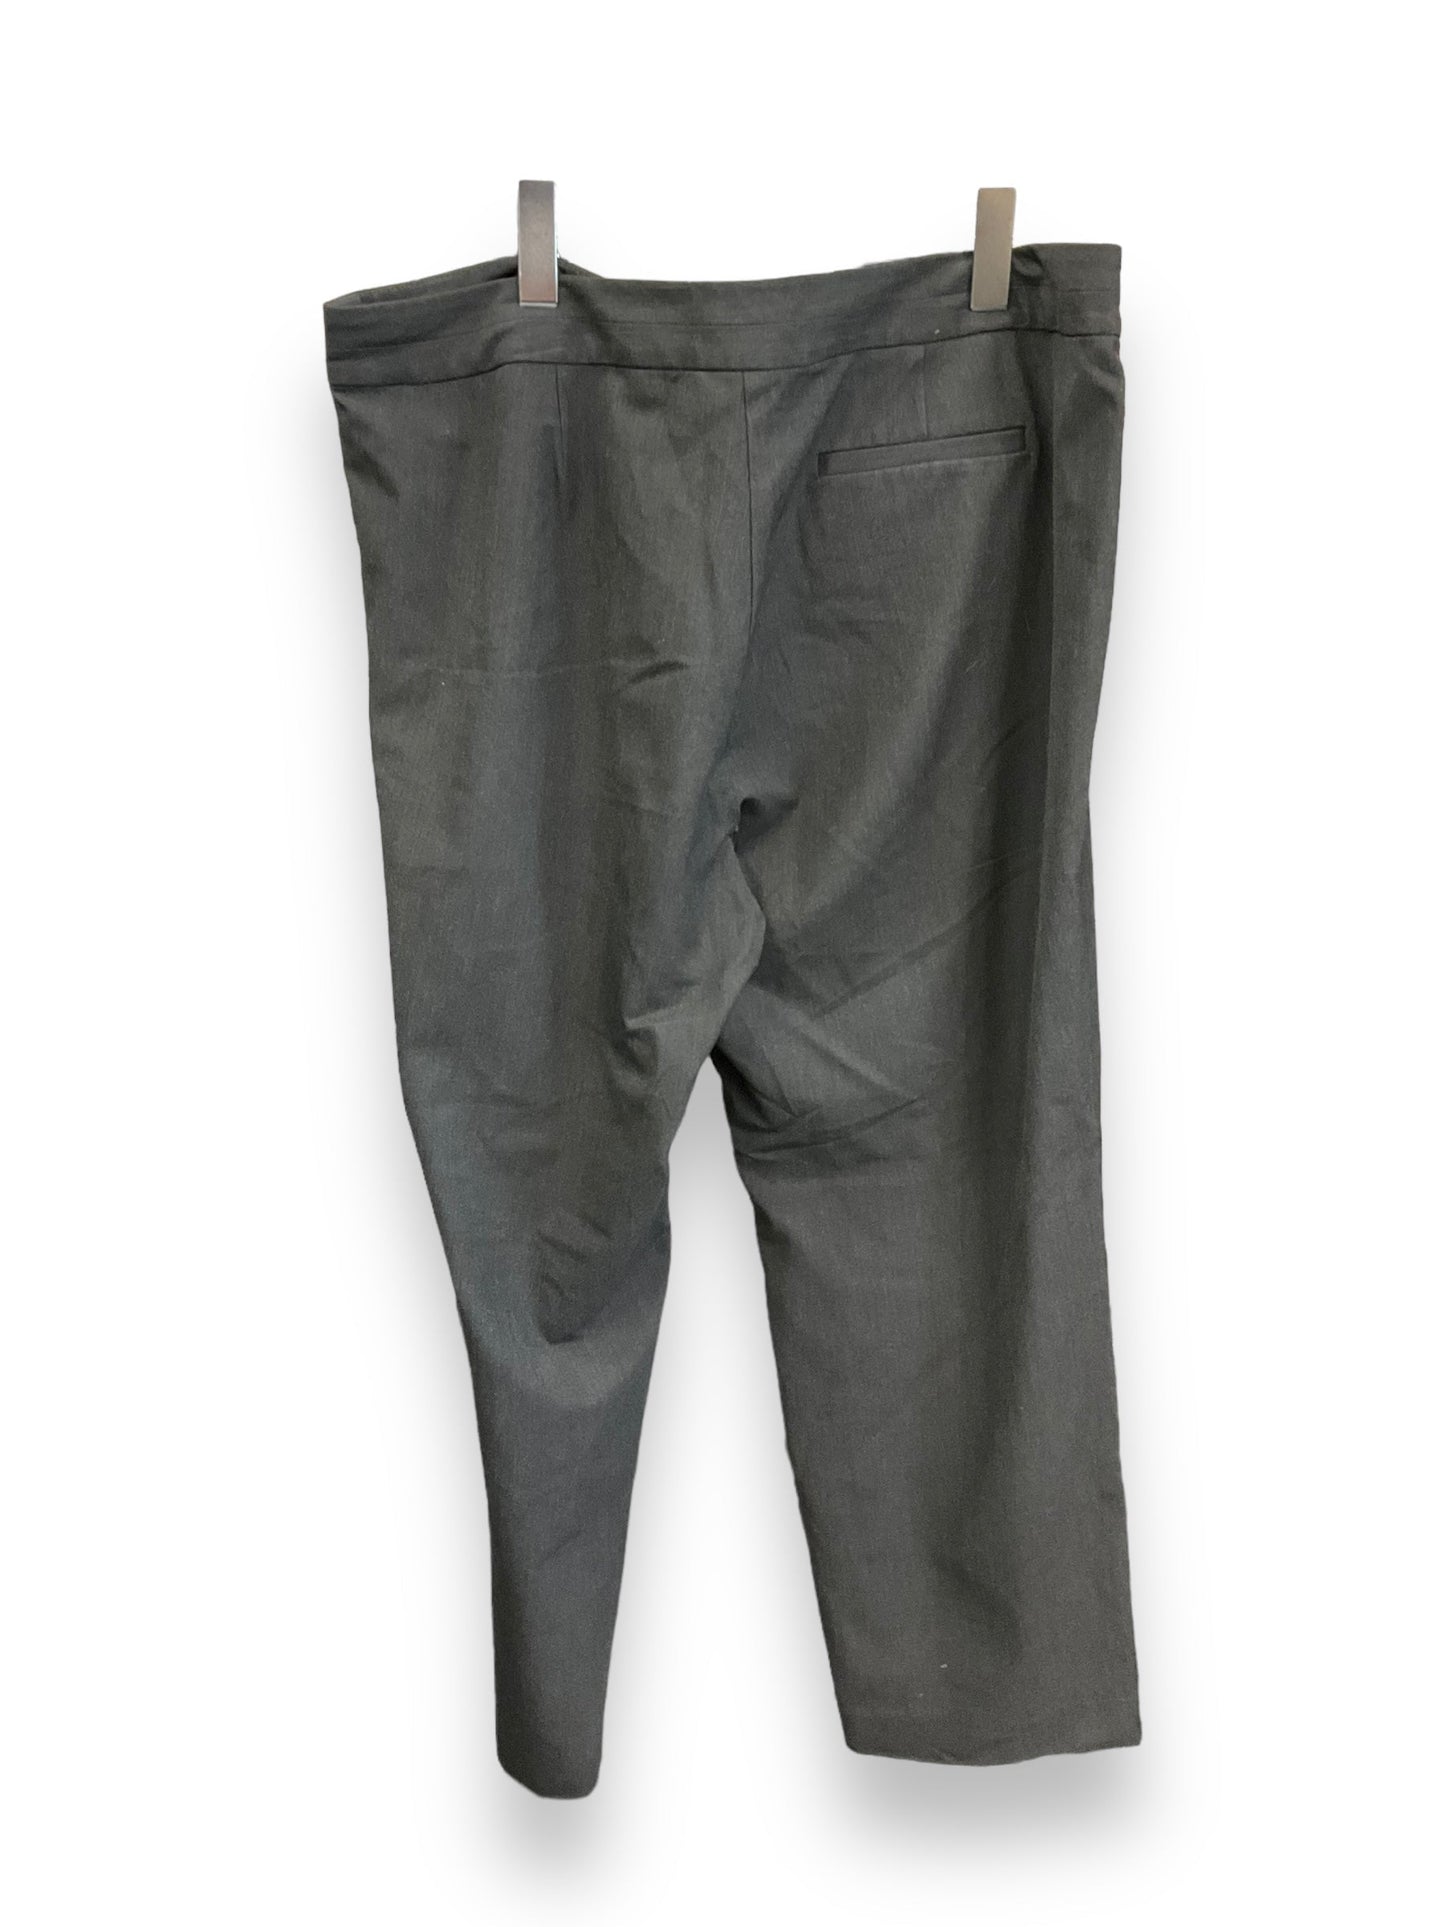 Athletic Pants By 32 Degrees  Size: 2x